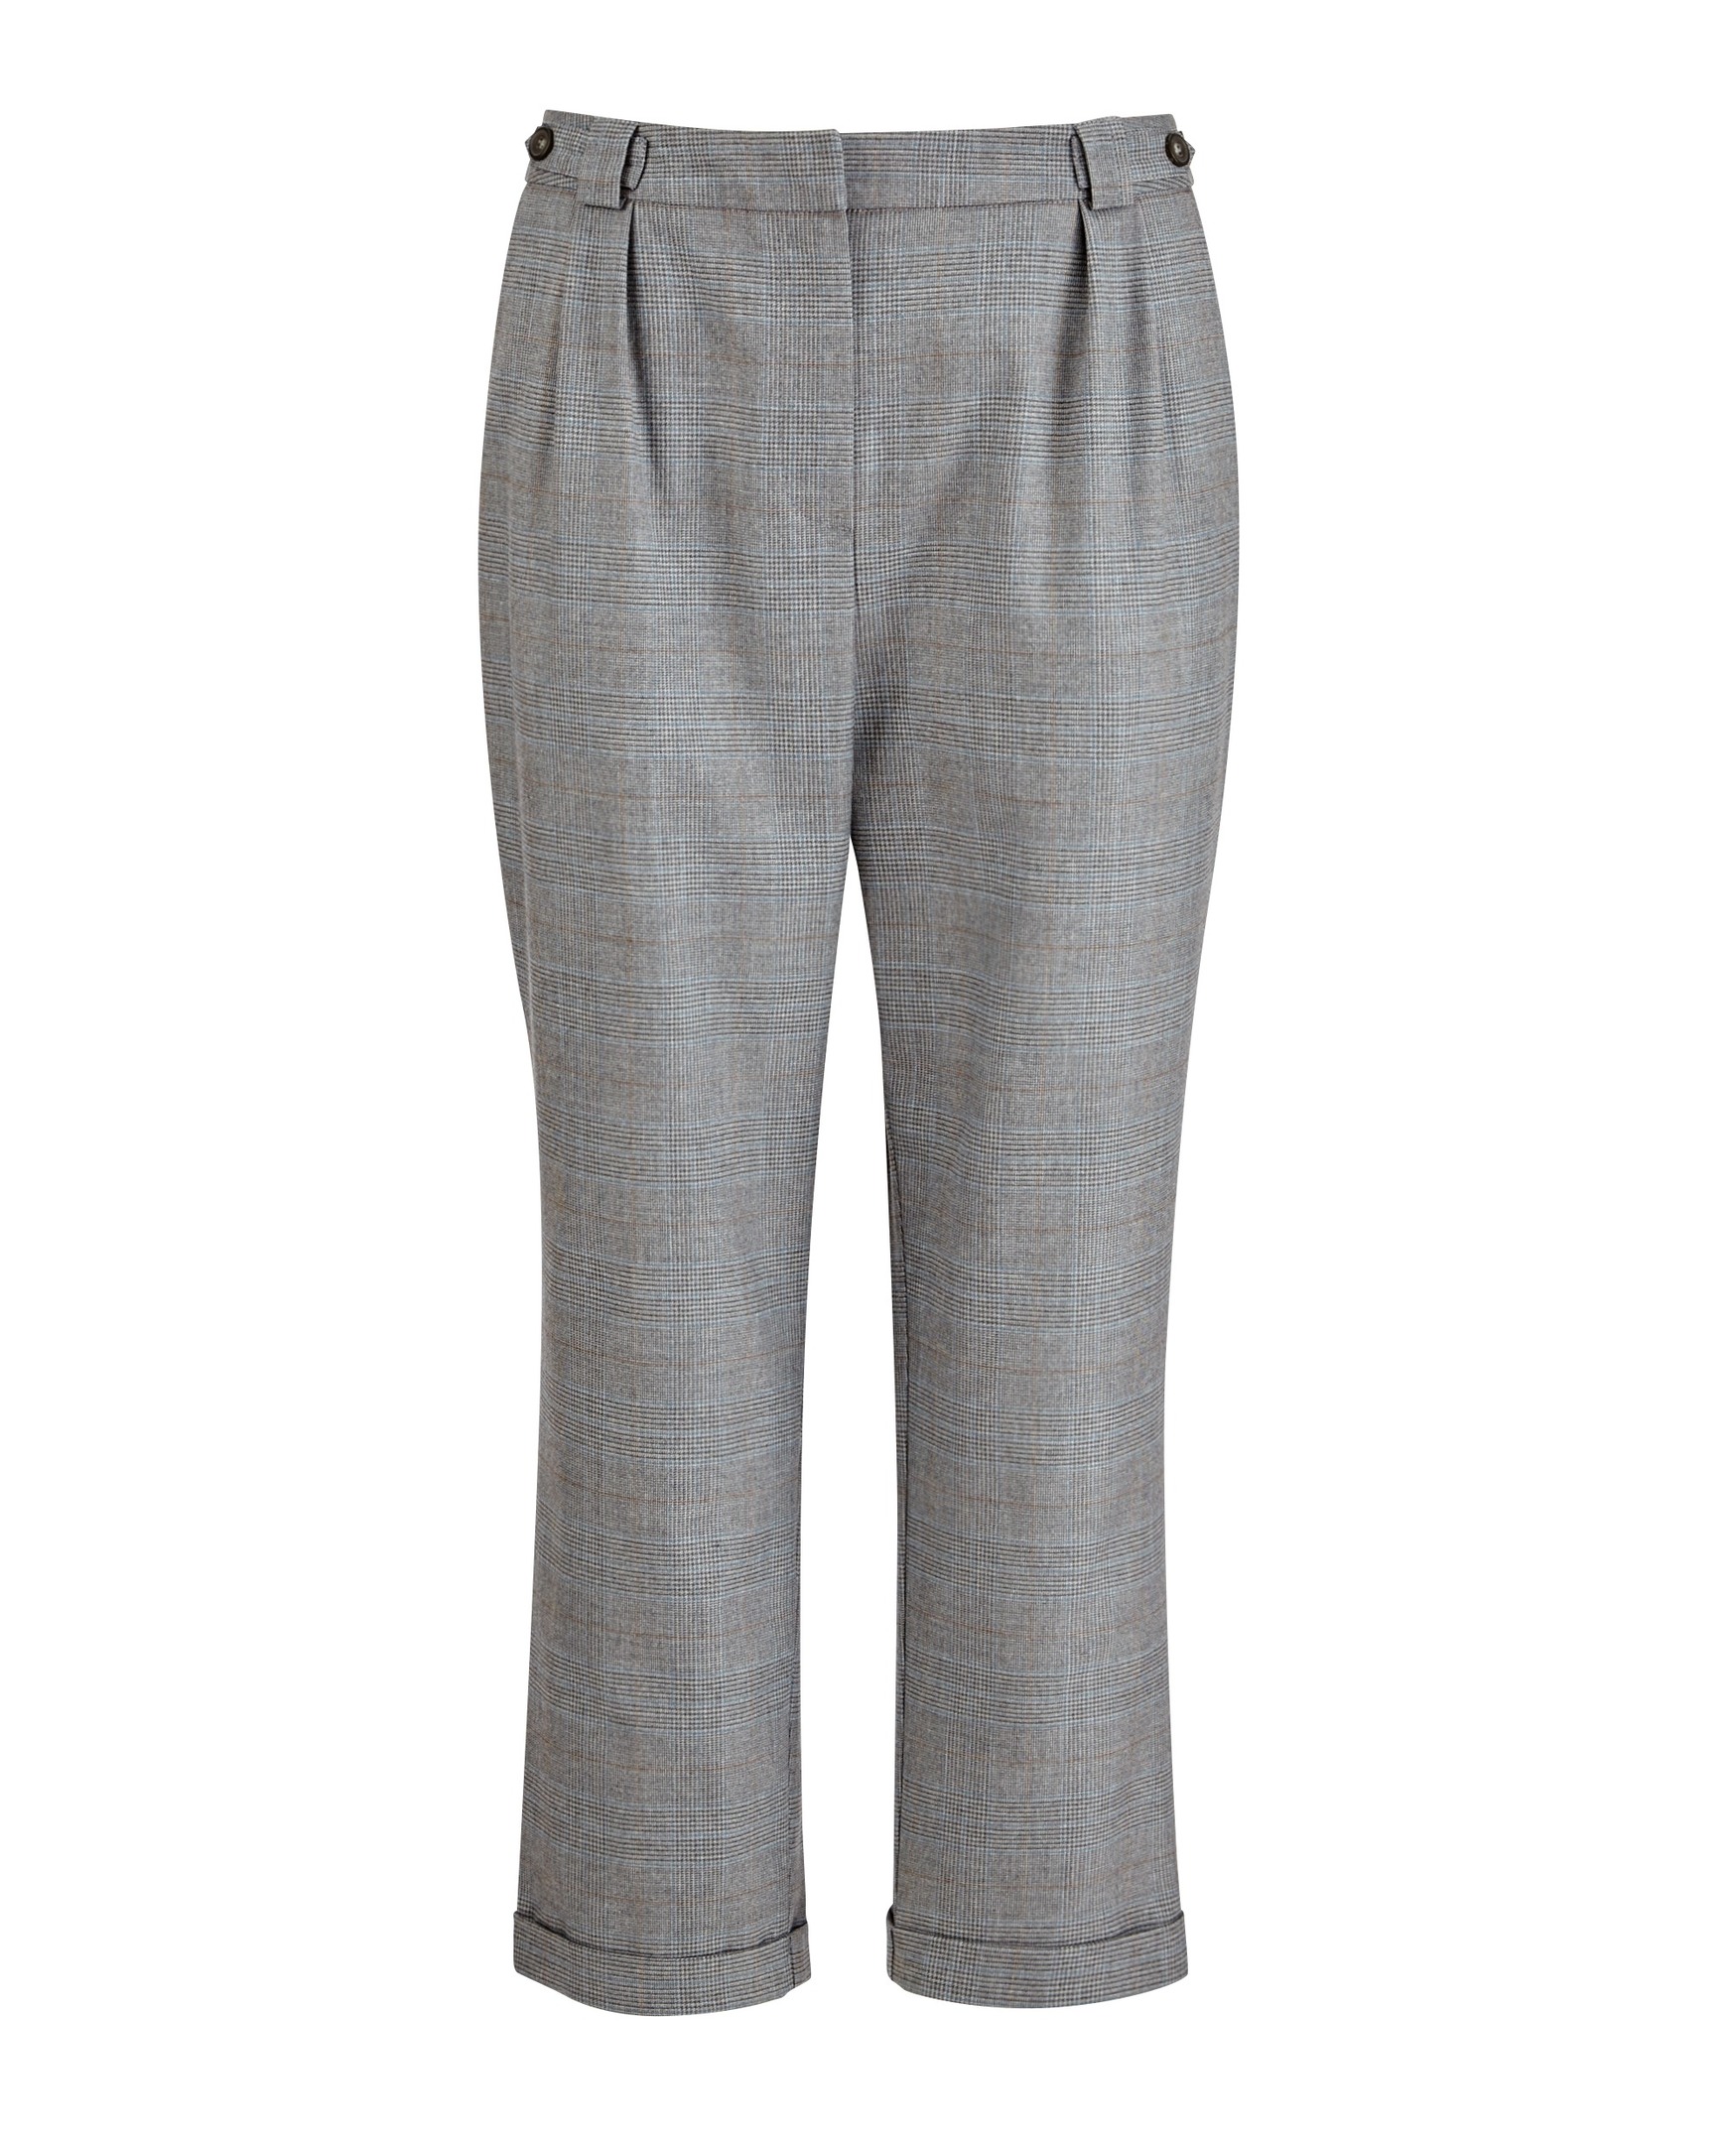 Trousers, £29, Very